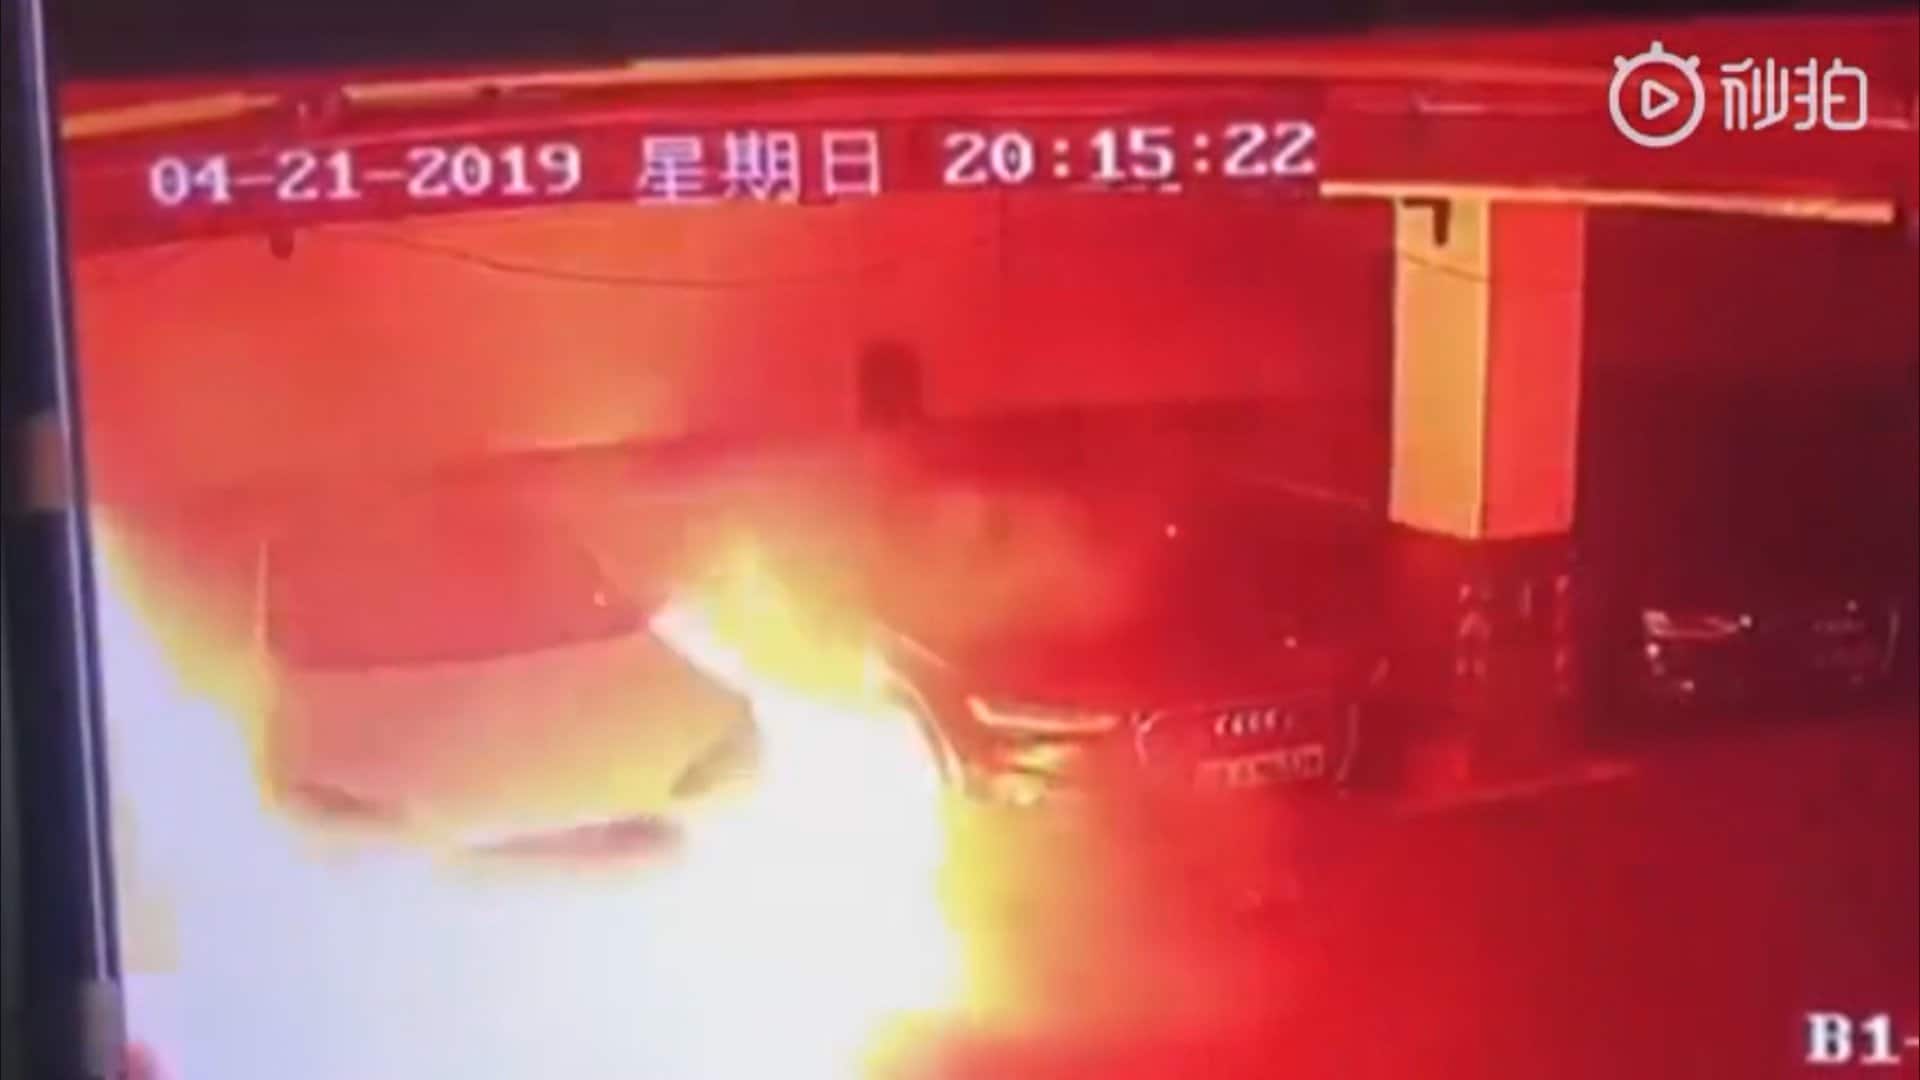 How Tesla can recover from the Model S explosion in Shanghai - Video - BNN